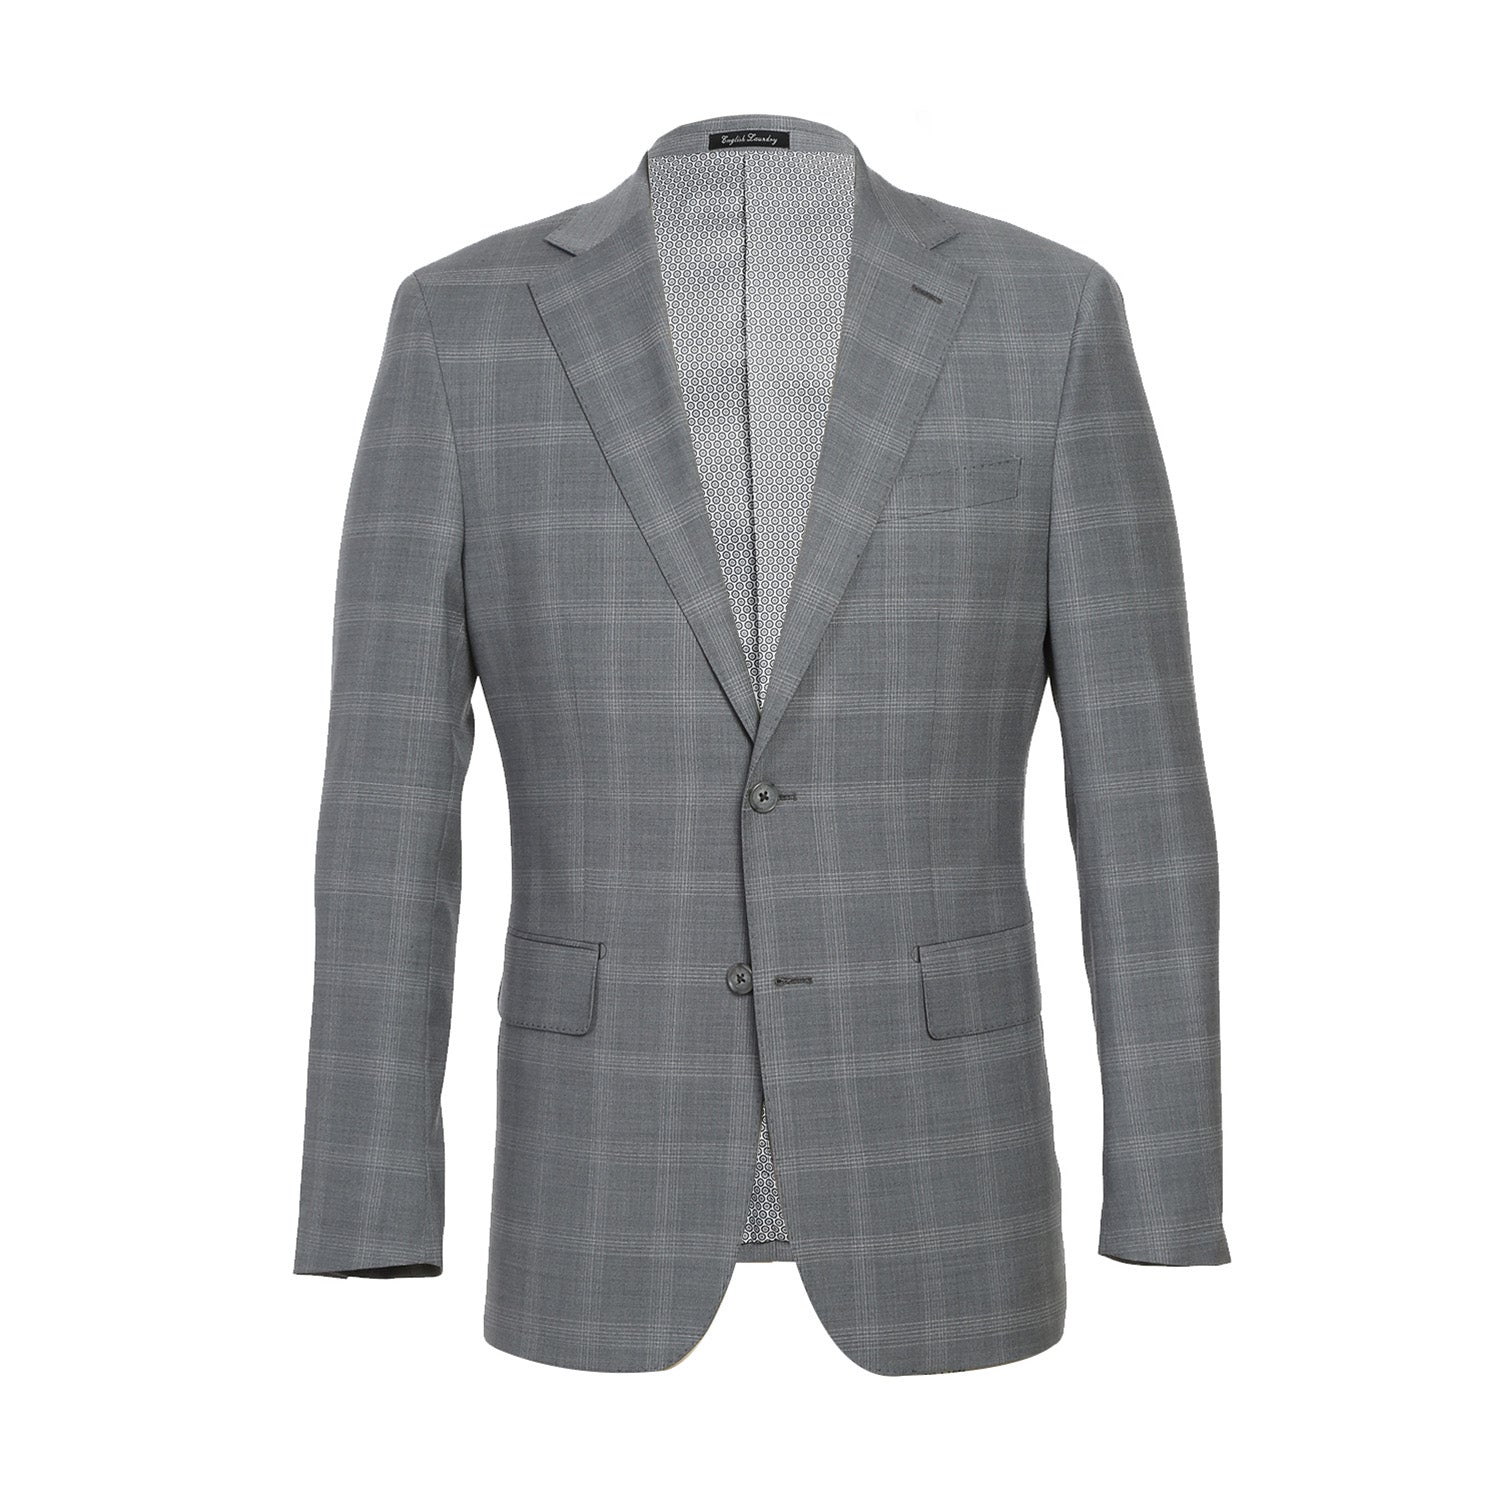 Wool Stretch Single Breasted SLIM FIT Suit in Light Grey Windowpane Check (Short, Regular, and Long Available) by English Laundry